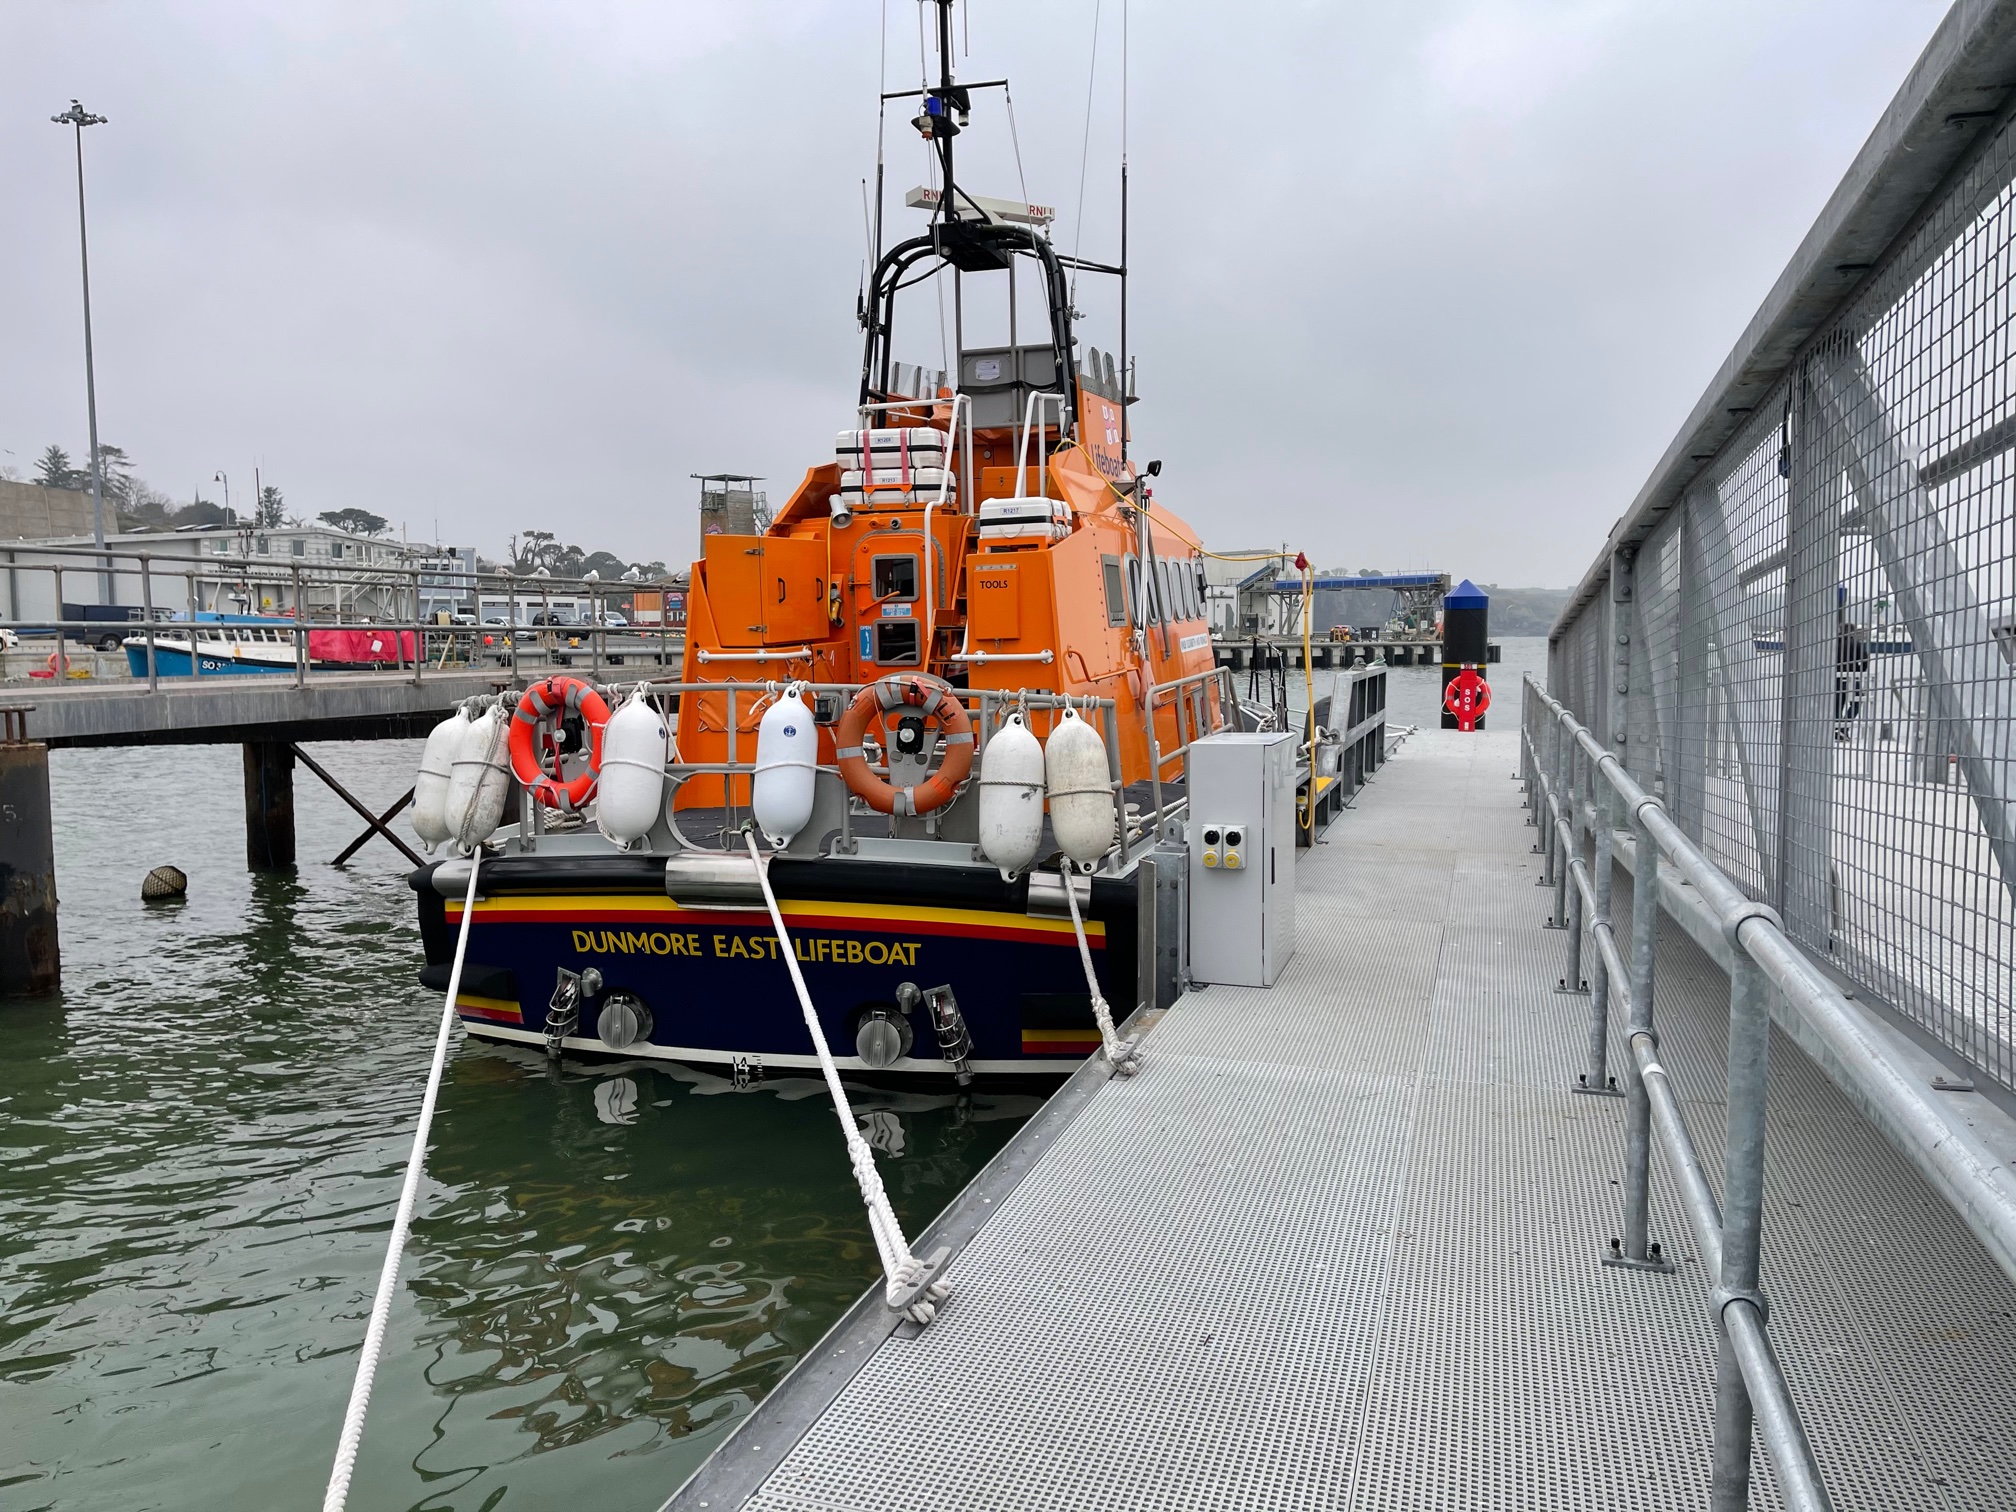 RNLI all-weather lifeboat moored to pontoon